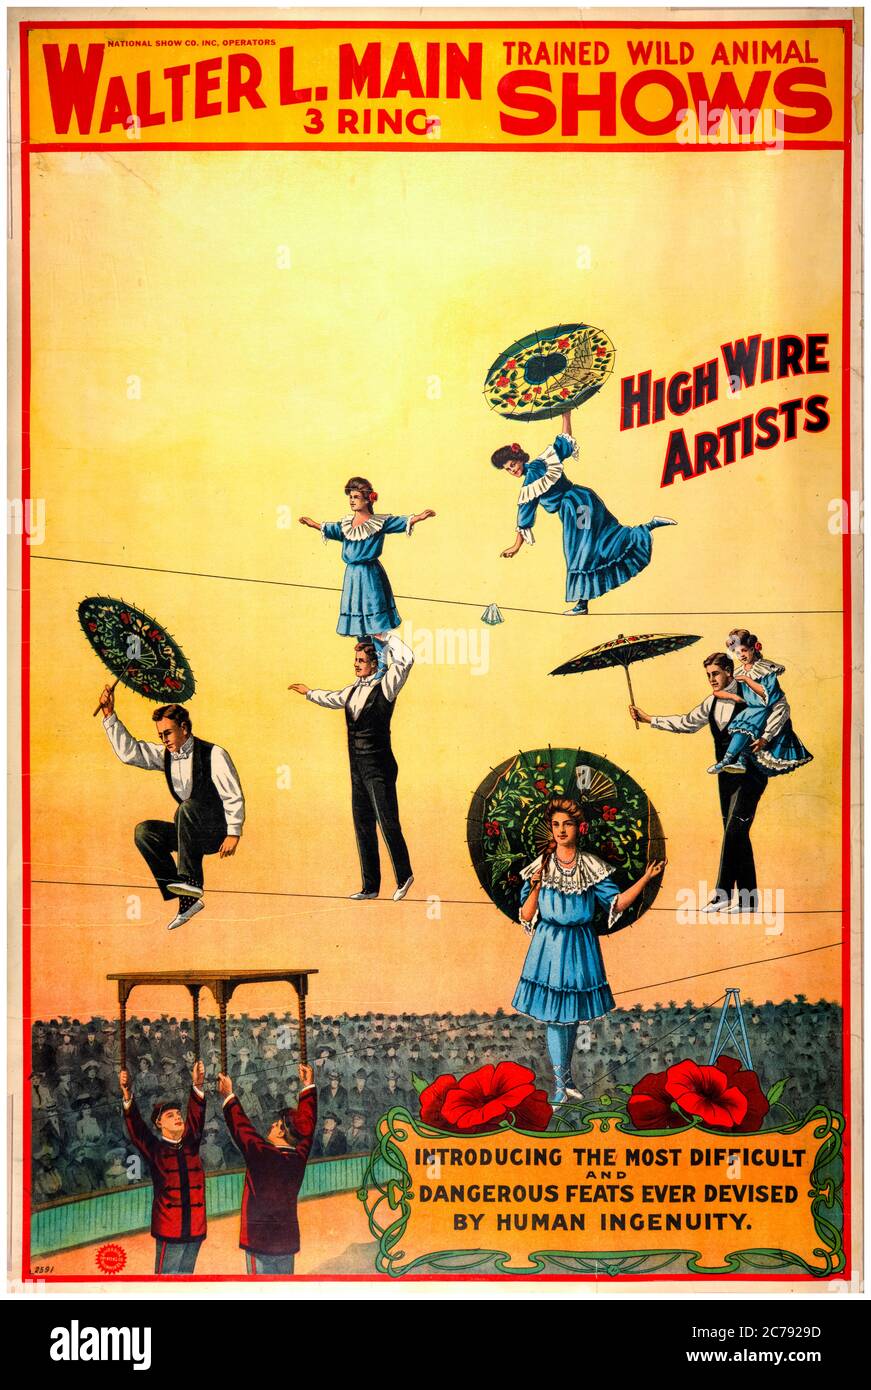 Walter L Main 3 ring trained wild animal shows circus poster with high wire performers, 1890-1904 Stock Photo